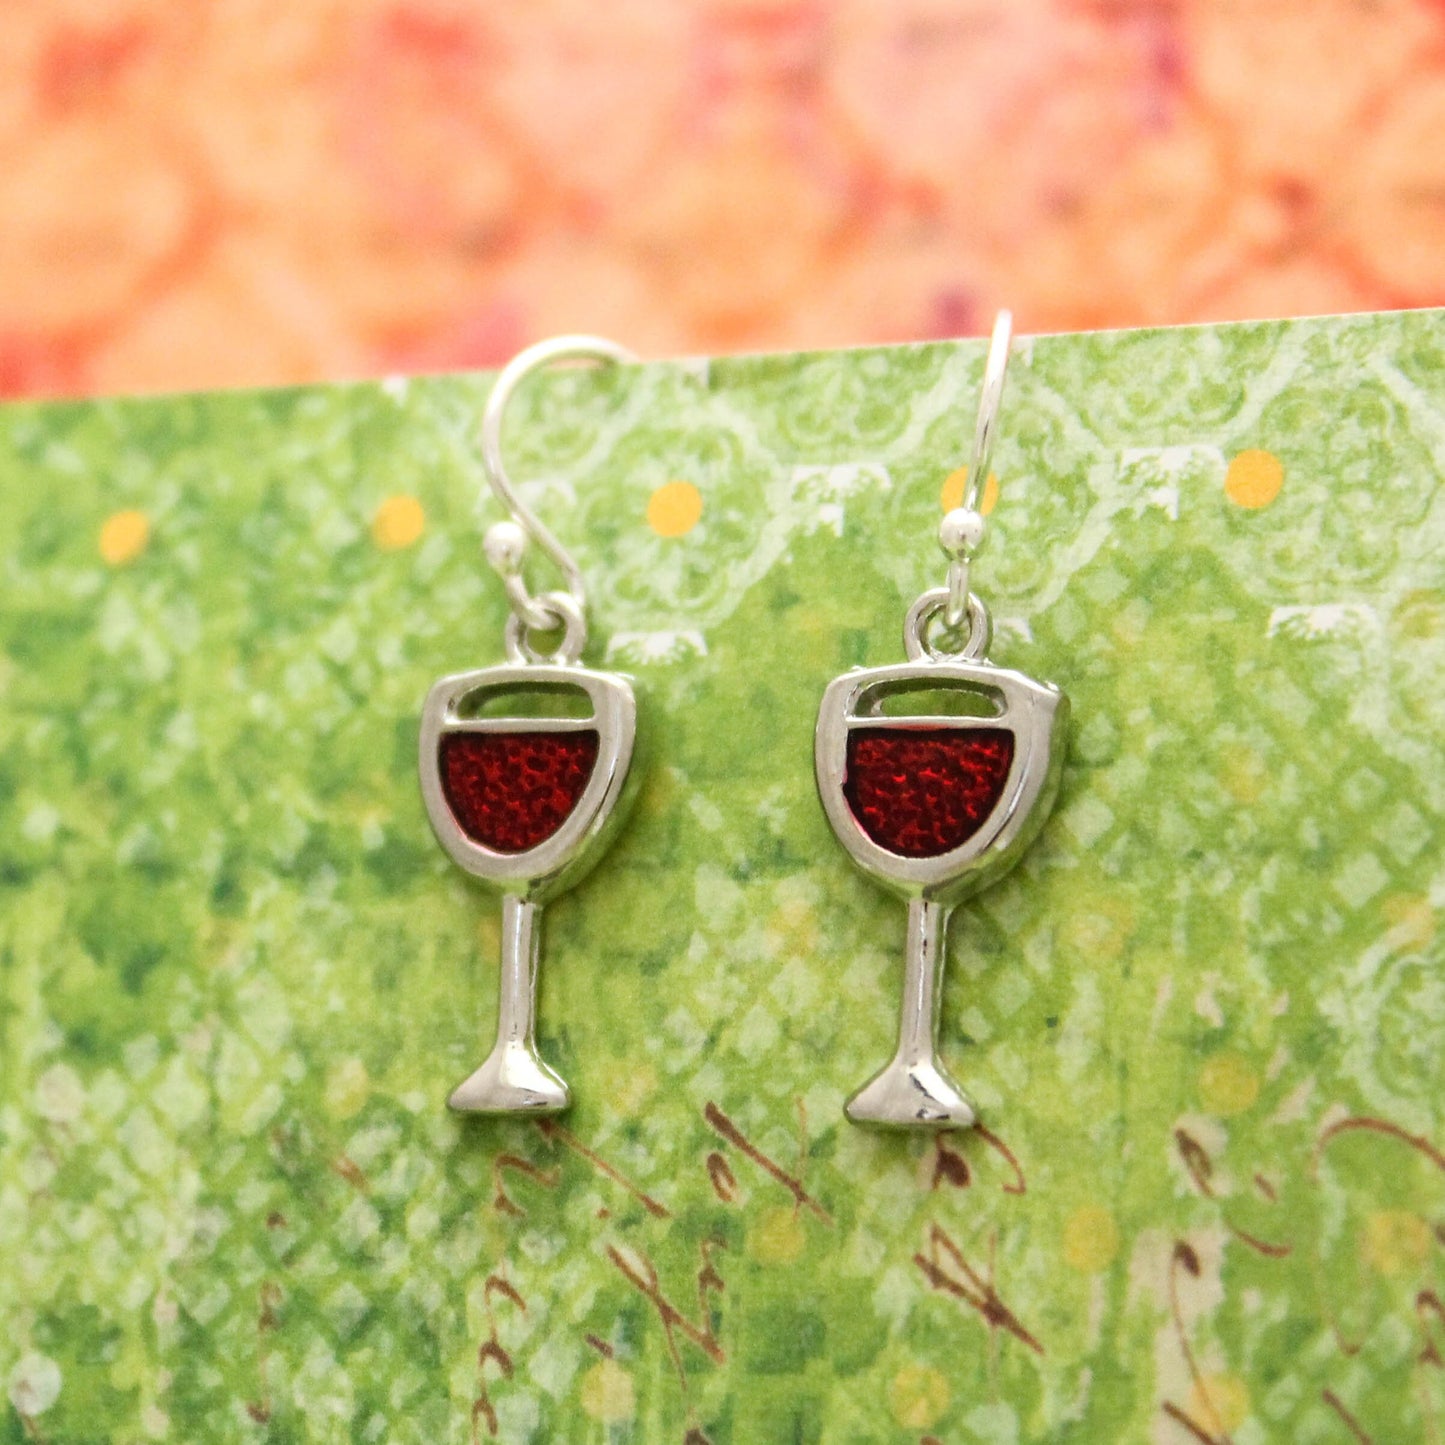 Cute Red Wine Earrings, Silver Wine Glass Earrings, Wine Lover Jewelry, Red Wine Earrings, Silver Festive Holiday Wine Jewelry, Gift for Her